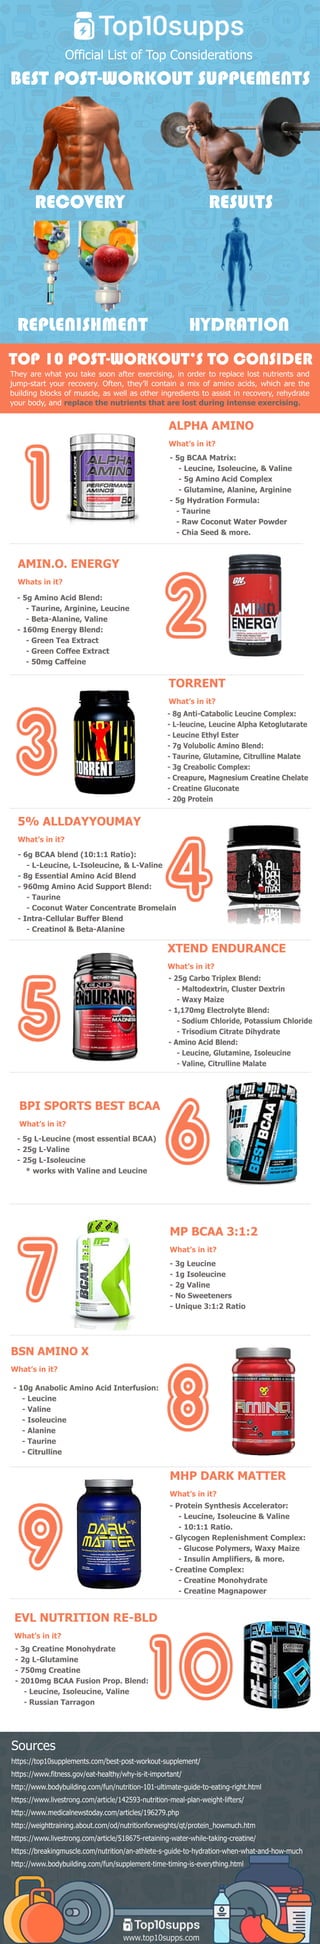 www.top10supps.com
https://top10supplements.com/best-post-workout-supplement/
https://www.fitness.gov/eat-healthy/why-is-it-important/
http://www.bodybuilding.com/fun/nutrition-101-ultimate-guide-to-eating-right.html
https://www.livestrong.com/article/142593-nutrition-meal-plan-weight-lifters/
http://www.medicalnewstoday.com/articles/196279.php
http://weighttraining.about.com/od/nutritionforweights/qt/protein_howmuch.htm
hhttps://www.livestrong.com/article/518675-retaining-water-while-taking-creatine/
https://breakingmuscle.com/nutrition/an-athlete-s-guide-to-hydration-when-what-and-how-much
http://www.bodybuilding.com/fun/supplement-time-timing-is-everything.html
Sources
Theyarewhatyoutakesoonafterexercising,inordertoreplacelostnutrientsand
jump-startyourrecovery.Often,they’llcontainamixofaminoacids,whicharethe
buildingblocksofmuscle,aswellasotheringredientstoassistinrecovery,rehydrate
yourbody,andreplacethenutrientsthatarelostduringintenseexercising.
TOP10POST-WORKOUT’STOCONSIDER
-3gCreatineMonohydrate
-2gL-Glutamine
-750mgCreatine
-2010mgBCAAFusionProp.Blend:
-Leucine,Isoleucine,Valine
-RussianTarragon
EVLNUTRITIONRE-BLD
What’sinit?
-ProteinSynthesisAccelerator:
-Leucine,Isoleucine&Valine
-10:1:1Ratio.
-GlycogenReplenishmentComplex:
-GlucosePolymers,WaxyMaize
-InsulinAmplifiers,&more.
-CreatineComplex:-CreatineComplex:
-CreatineMonohydrate
-CreatineMagnapower
MHPDARKMATTER
What’sinit?
-10gAnabolicAminoAcidInterfusion:
-Leucine
-Valine
-Isoleucine
-Alanine
-Taurine
-Citrulline-Citrulline
BSNAMINOX
What’sinit?
-3gLeucine
-1gIsoleucine
-2gValine
-NoSweeteners
-Unique3:1:2Ratio
MPBCAA3:1:2
What’sinit?
-5gL-Leucine(mostessentialBCAA)
-25gL-Valine
-25gL-Isoleucine
*workswithValineandLeucine
BPISPORTSBESTBCAA
What’sinit?
-25gCarboTriplexBlend:
-Maltodextrin,ClusterDextrin
-WaxyMaize
-1,170mgElectrolyteBlend:
-Sodium Chloride,Potassium Chloride
-Trisodium CitrateDihydrate
-AminoAcidBlend:-AminoAcidBlend:
-Leucine,Glutamine,Isoleucine
-Valine,CitrullineMalate
XTENDENDURANCE
What’sinit?
-6gBCAAblend(10:1:1Ratio):
-L-Leucine,L-Isoleucine,&L-Valine
-8gEssentialAminoAcidBlend
-960mgAminoAcidSupportBlend:
-Taurine
-CoconutWaterConcentrateBromelain
-Intra-CellularBufferBlend-Intra-CellularBufferBlend
-Creatinol&Beta-Alanine
5% ALLDAYYOUMAY
What’sinit?
-8gAnti-CatabolicLeucineComplex:
-L-leucine,LeucineAlphaKetoglutarate
-LeucineEthylEster
-7gVolubolicAminoBlend:
-Taurine,Glutamine,CitrullineMalate
-3gCreabolicComplex:
-Creapure,Magnesium CreatineChelate-Creapure,Magnesium CreatineChelate
-CreatineGluconate
-20gProtein
TORRENT
What’sinit?
-5gAminoAcidBlend:
-Taurine,Arginine,Leucine
-Beta-Alanine,Valine
-160mgEnergyBlend:
-GreenTeaExtract
-GreenCoffeeExtract
-50mgCaffeine-50mgCaffeine
AMIN.O.ENERGY
Whatsinit?
-5gBCAAMatrix:
-Leucine,Isoleucine,&Valine
-5gAminoAcidComplex
-Glutamine,Alanine,Arginine
-5gHydrationFormula:
-Taurine
-Raw CoconutWaterPowder-Raw CoconutWaterPowder
-ChiaSeed&more.
ALPHAAMINO
What’sinit?
RECOVERY RESULTS
HYDRATIONREPLENISHMENT
BESTPOST-WORKOUTSUPPLEMENTS
OfficialListofTopConsiderations
 